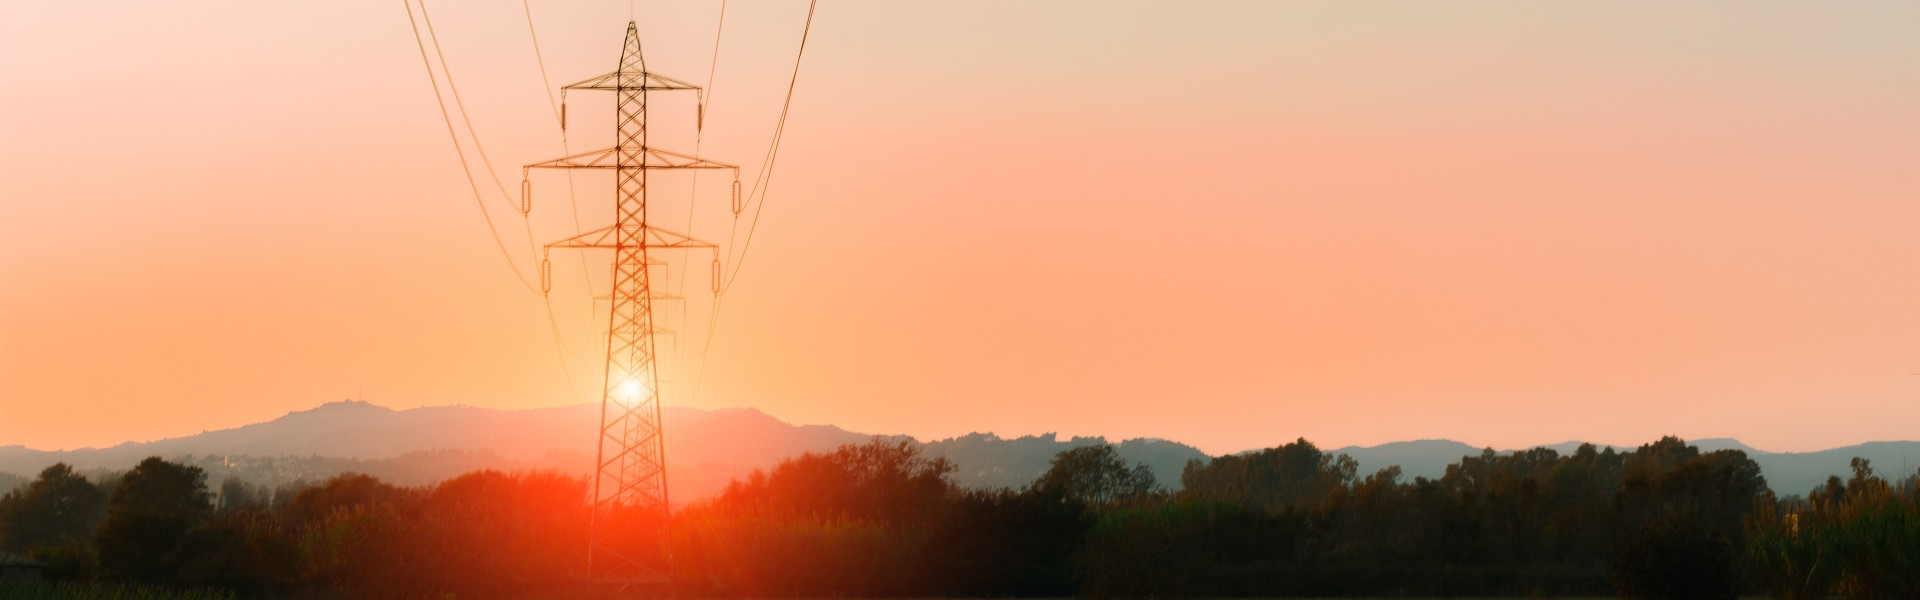 Sunset and electric power line